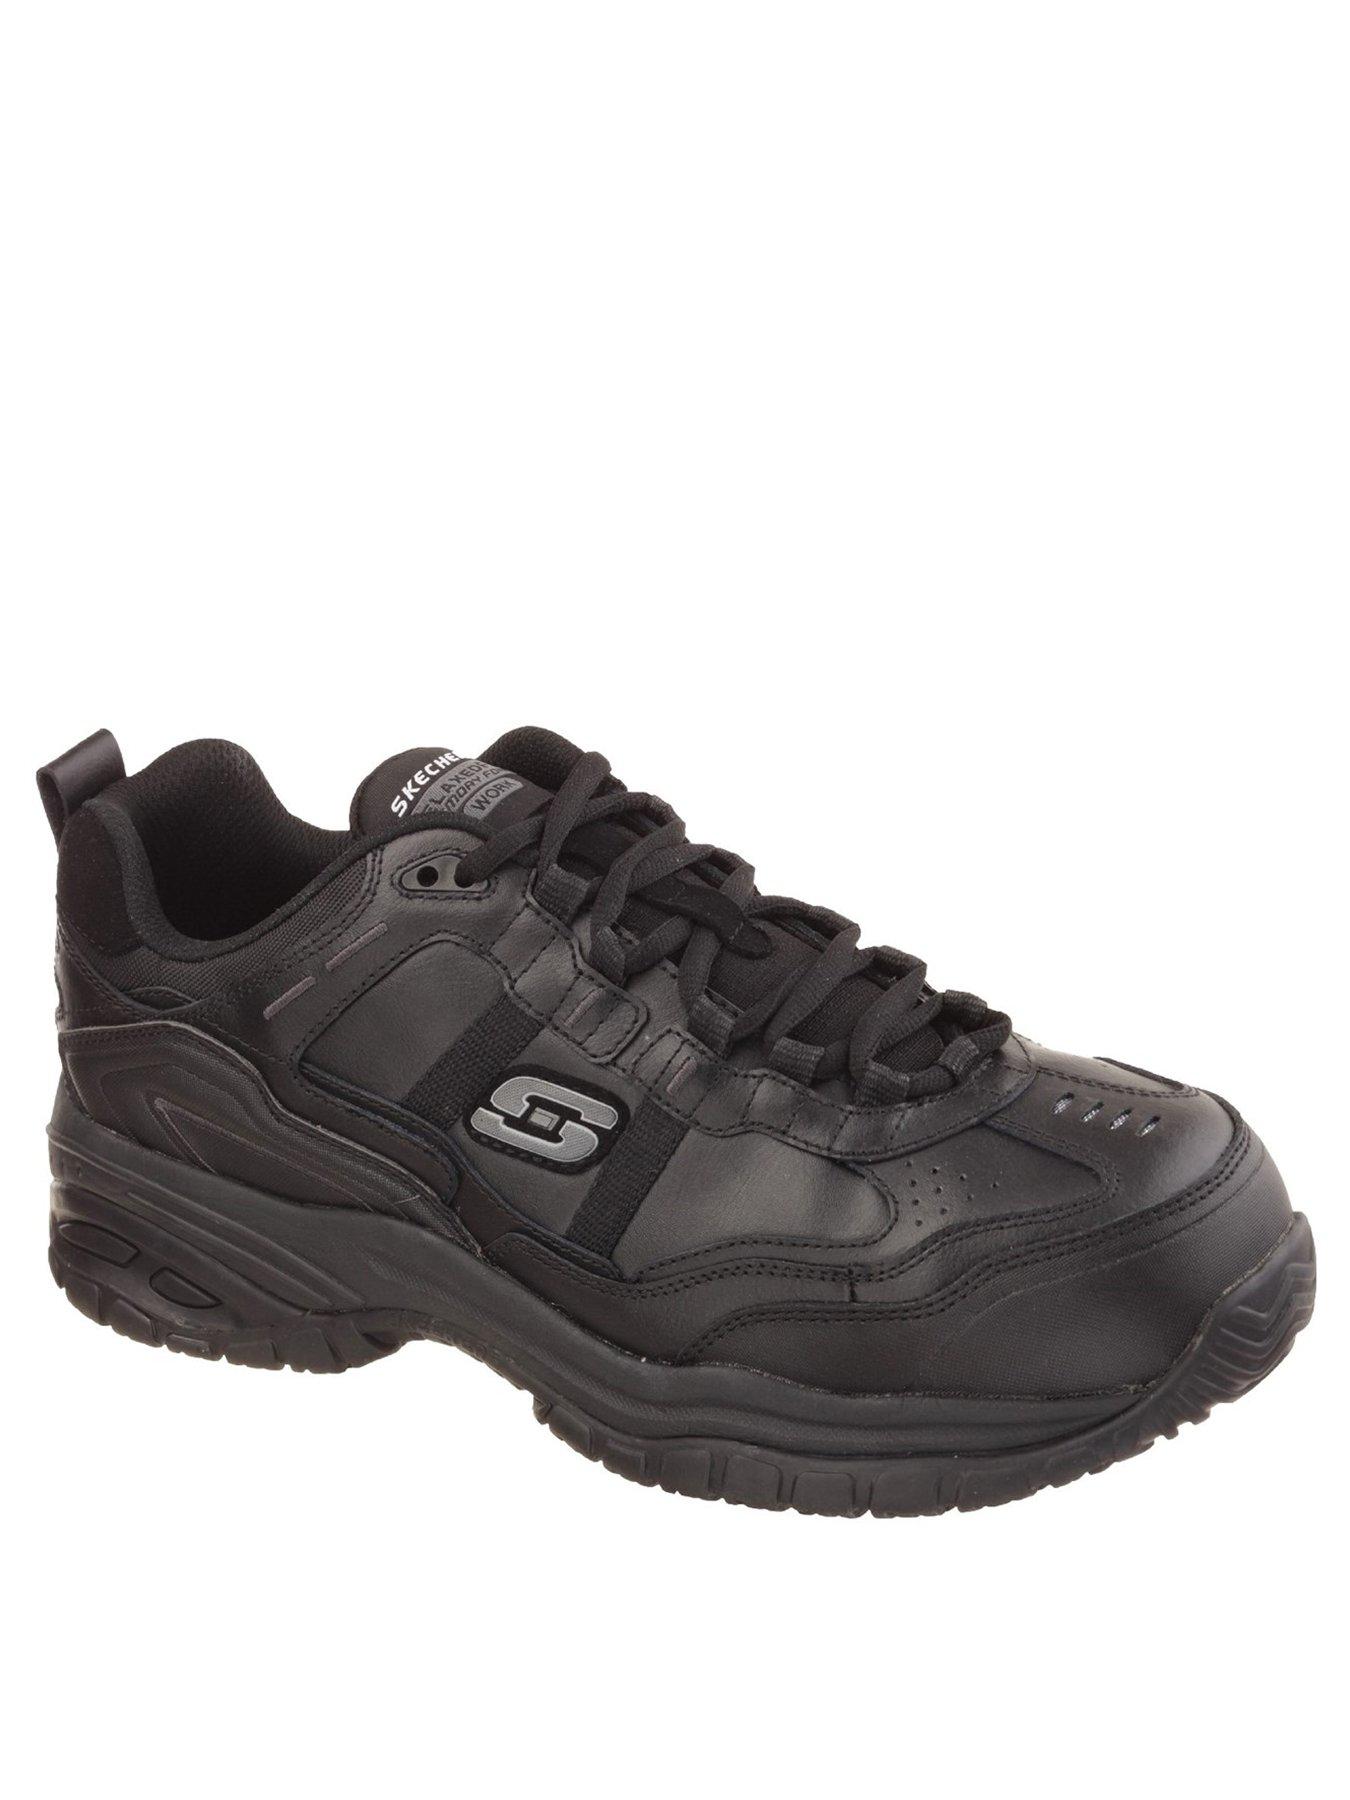 skechers relaxed fit work